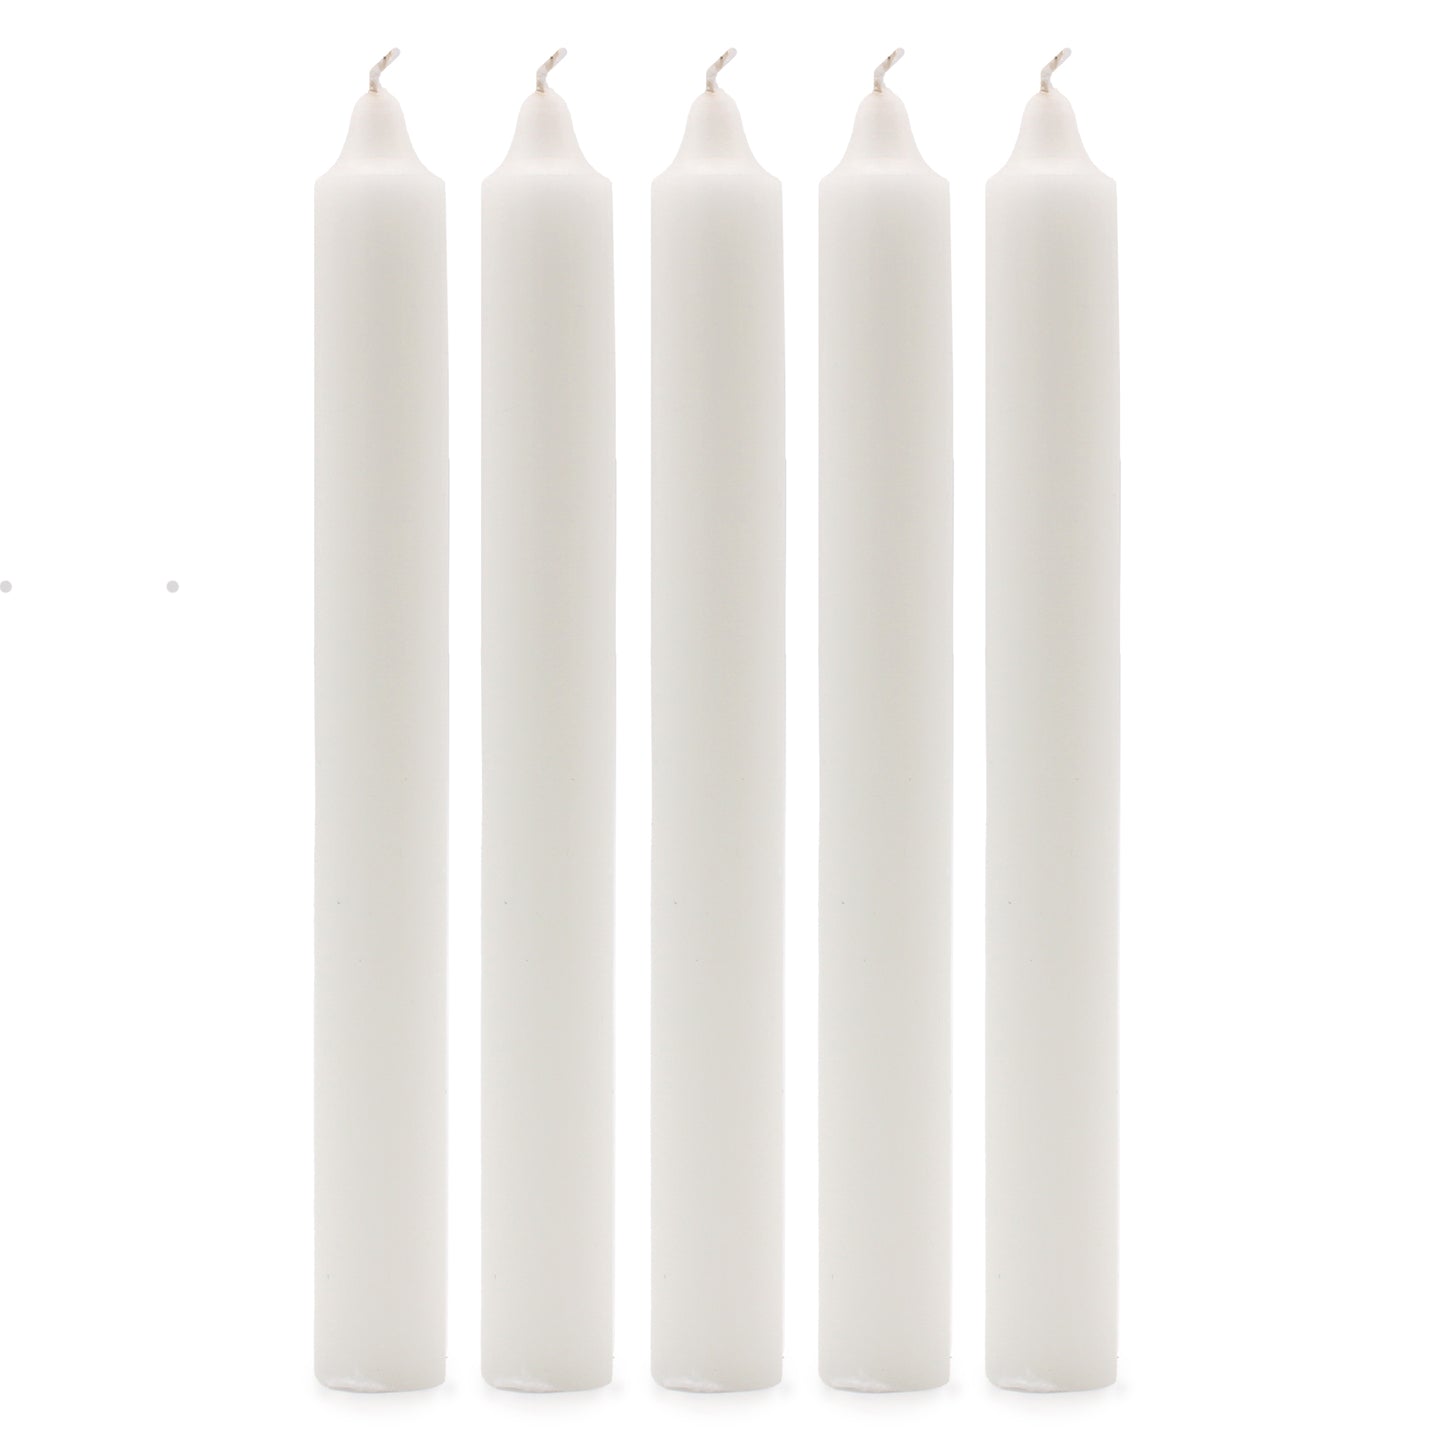 Solid Colour Dinner Candles - Rustic White - Pack of 5